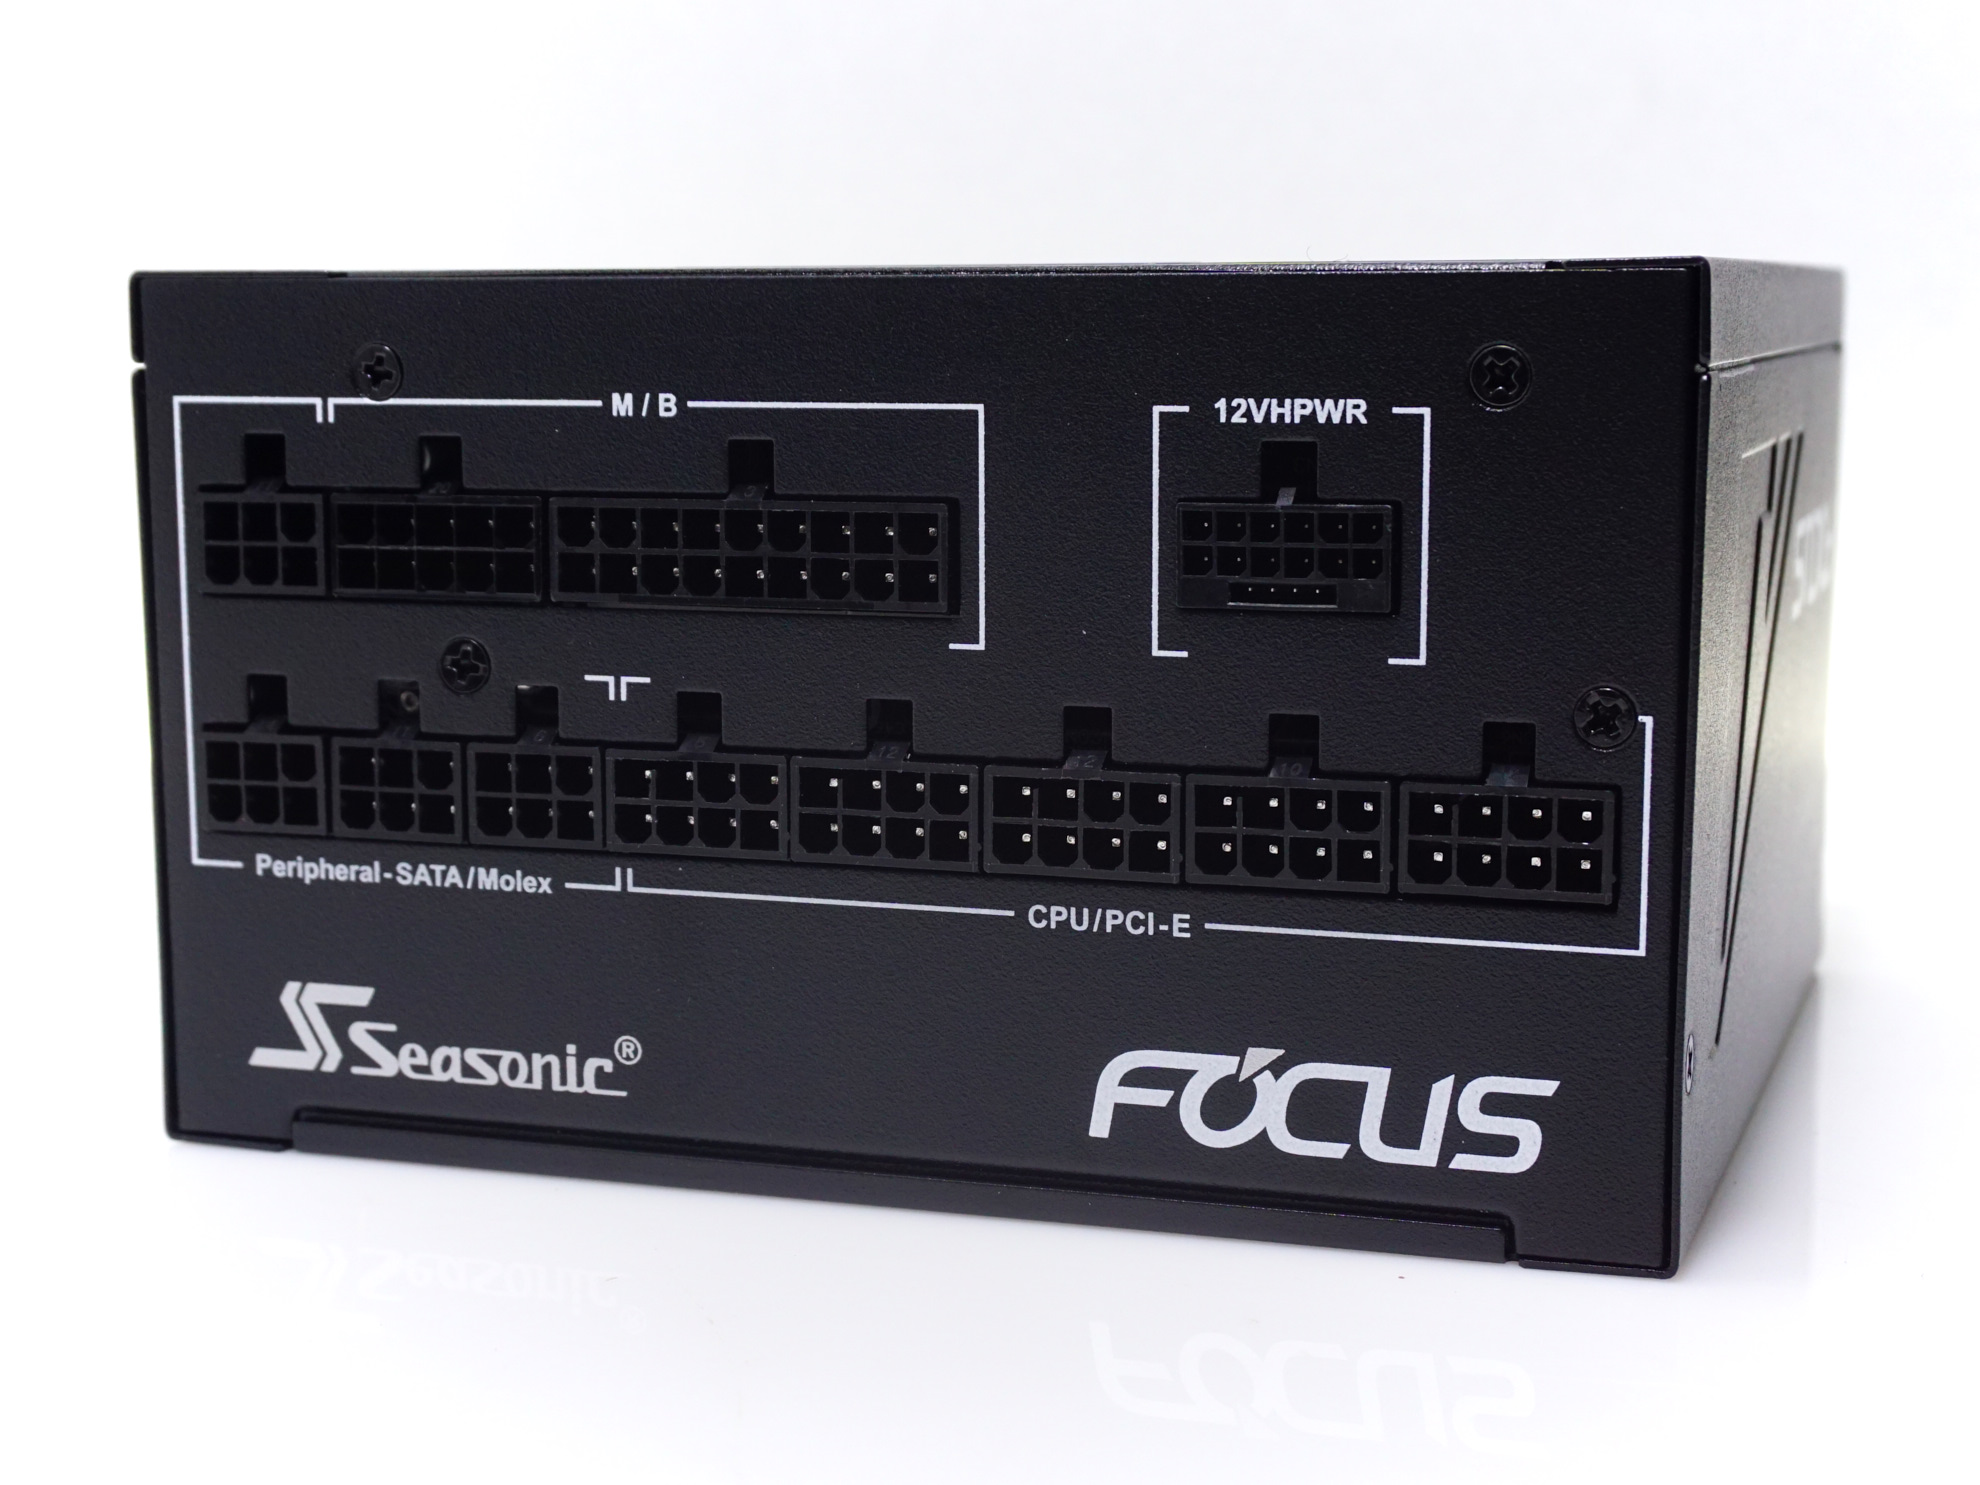 The SeaSonic Focus GX-850 ATX 3.0 PSU Review: Cool, Quiet, and Robust